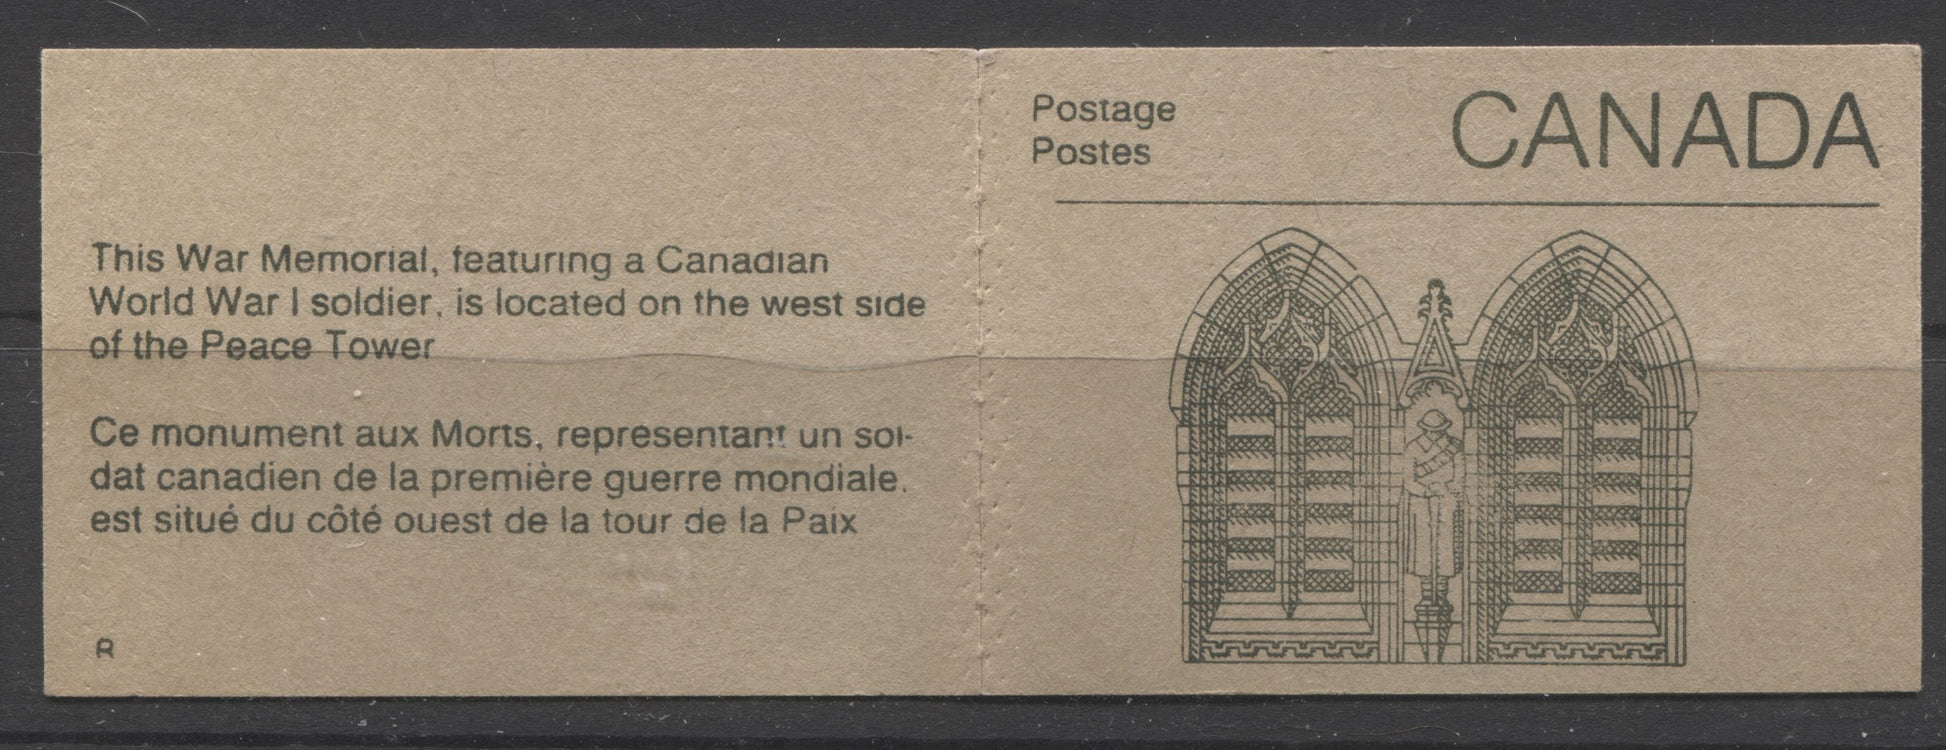 Canada #BK92 1982-1987 Artifacts and National Parks Issue, Complete 50¢ Booklets With Print Flaws on Panes Brixton Chrome 